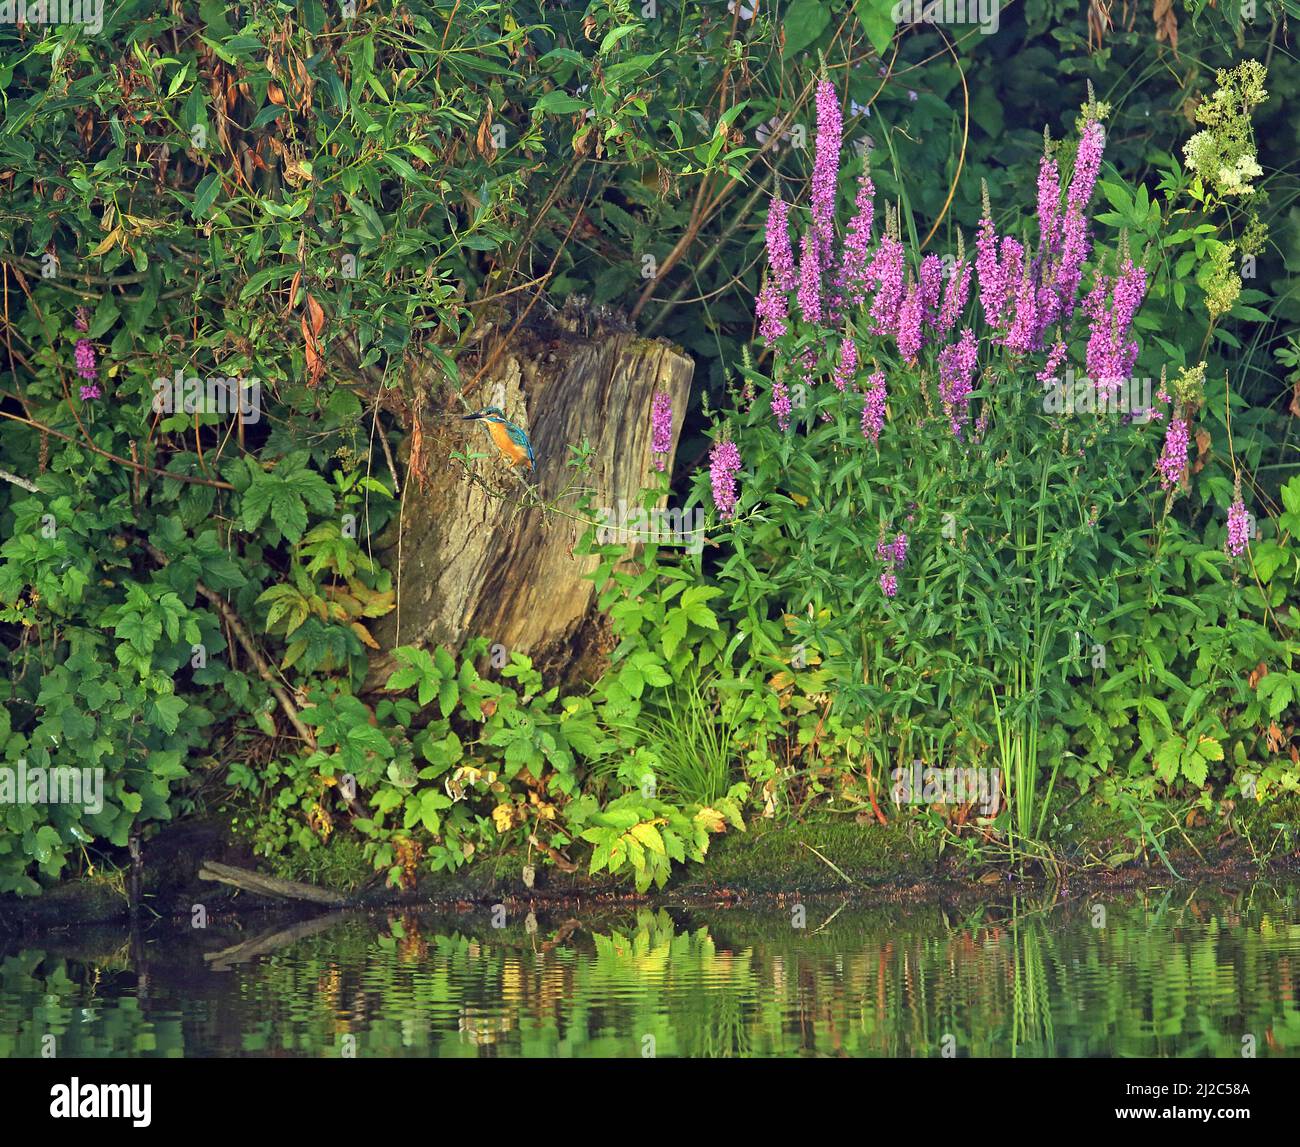 Kingfisher perched by the river beside large purple flowers Stock Photo